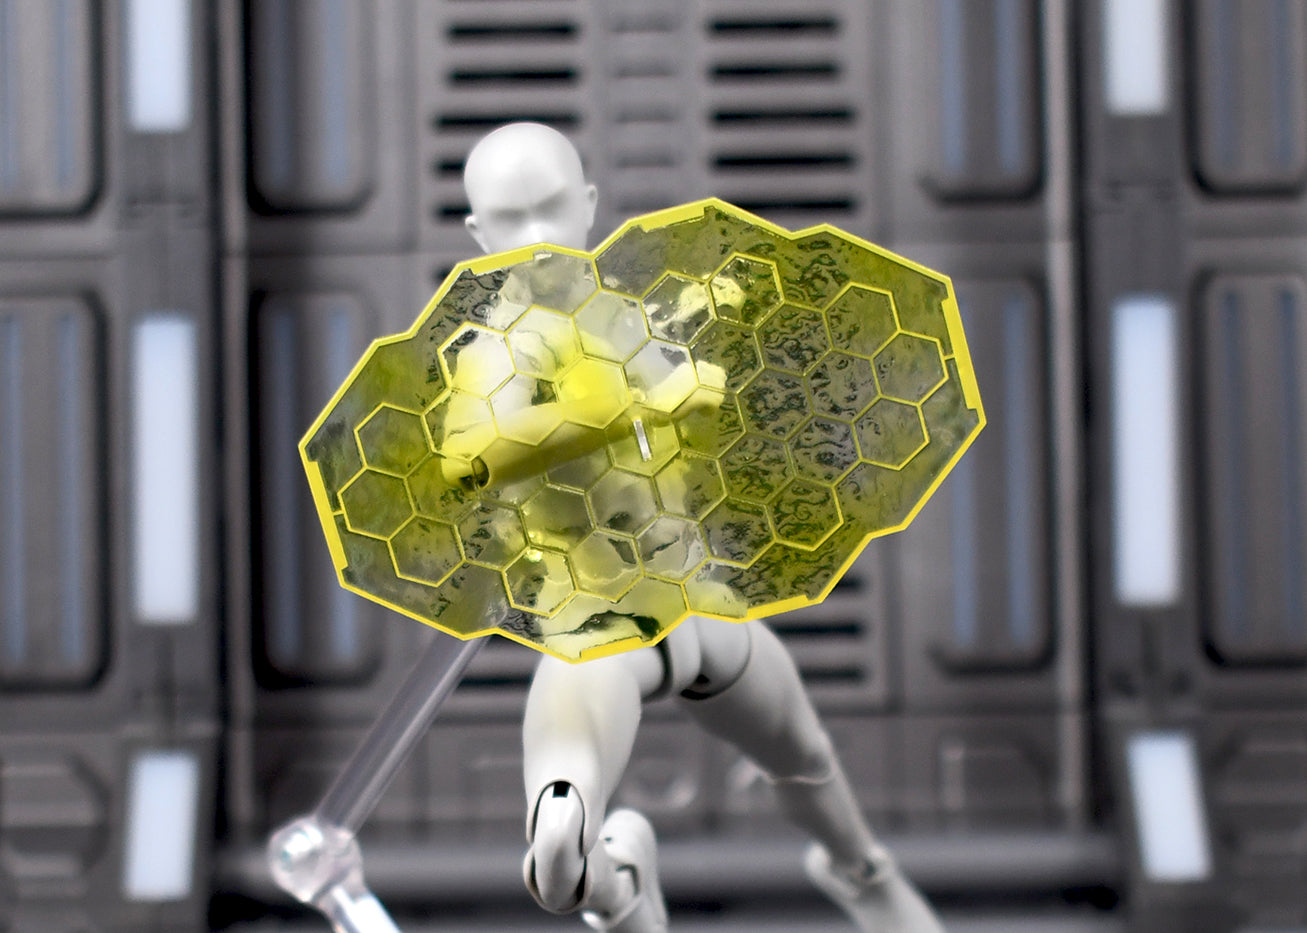 Energy Shield 1 - General 1/12 Scale Compatible